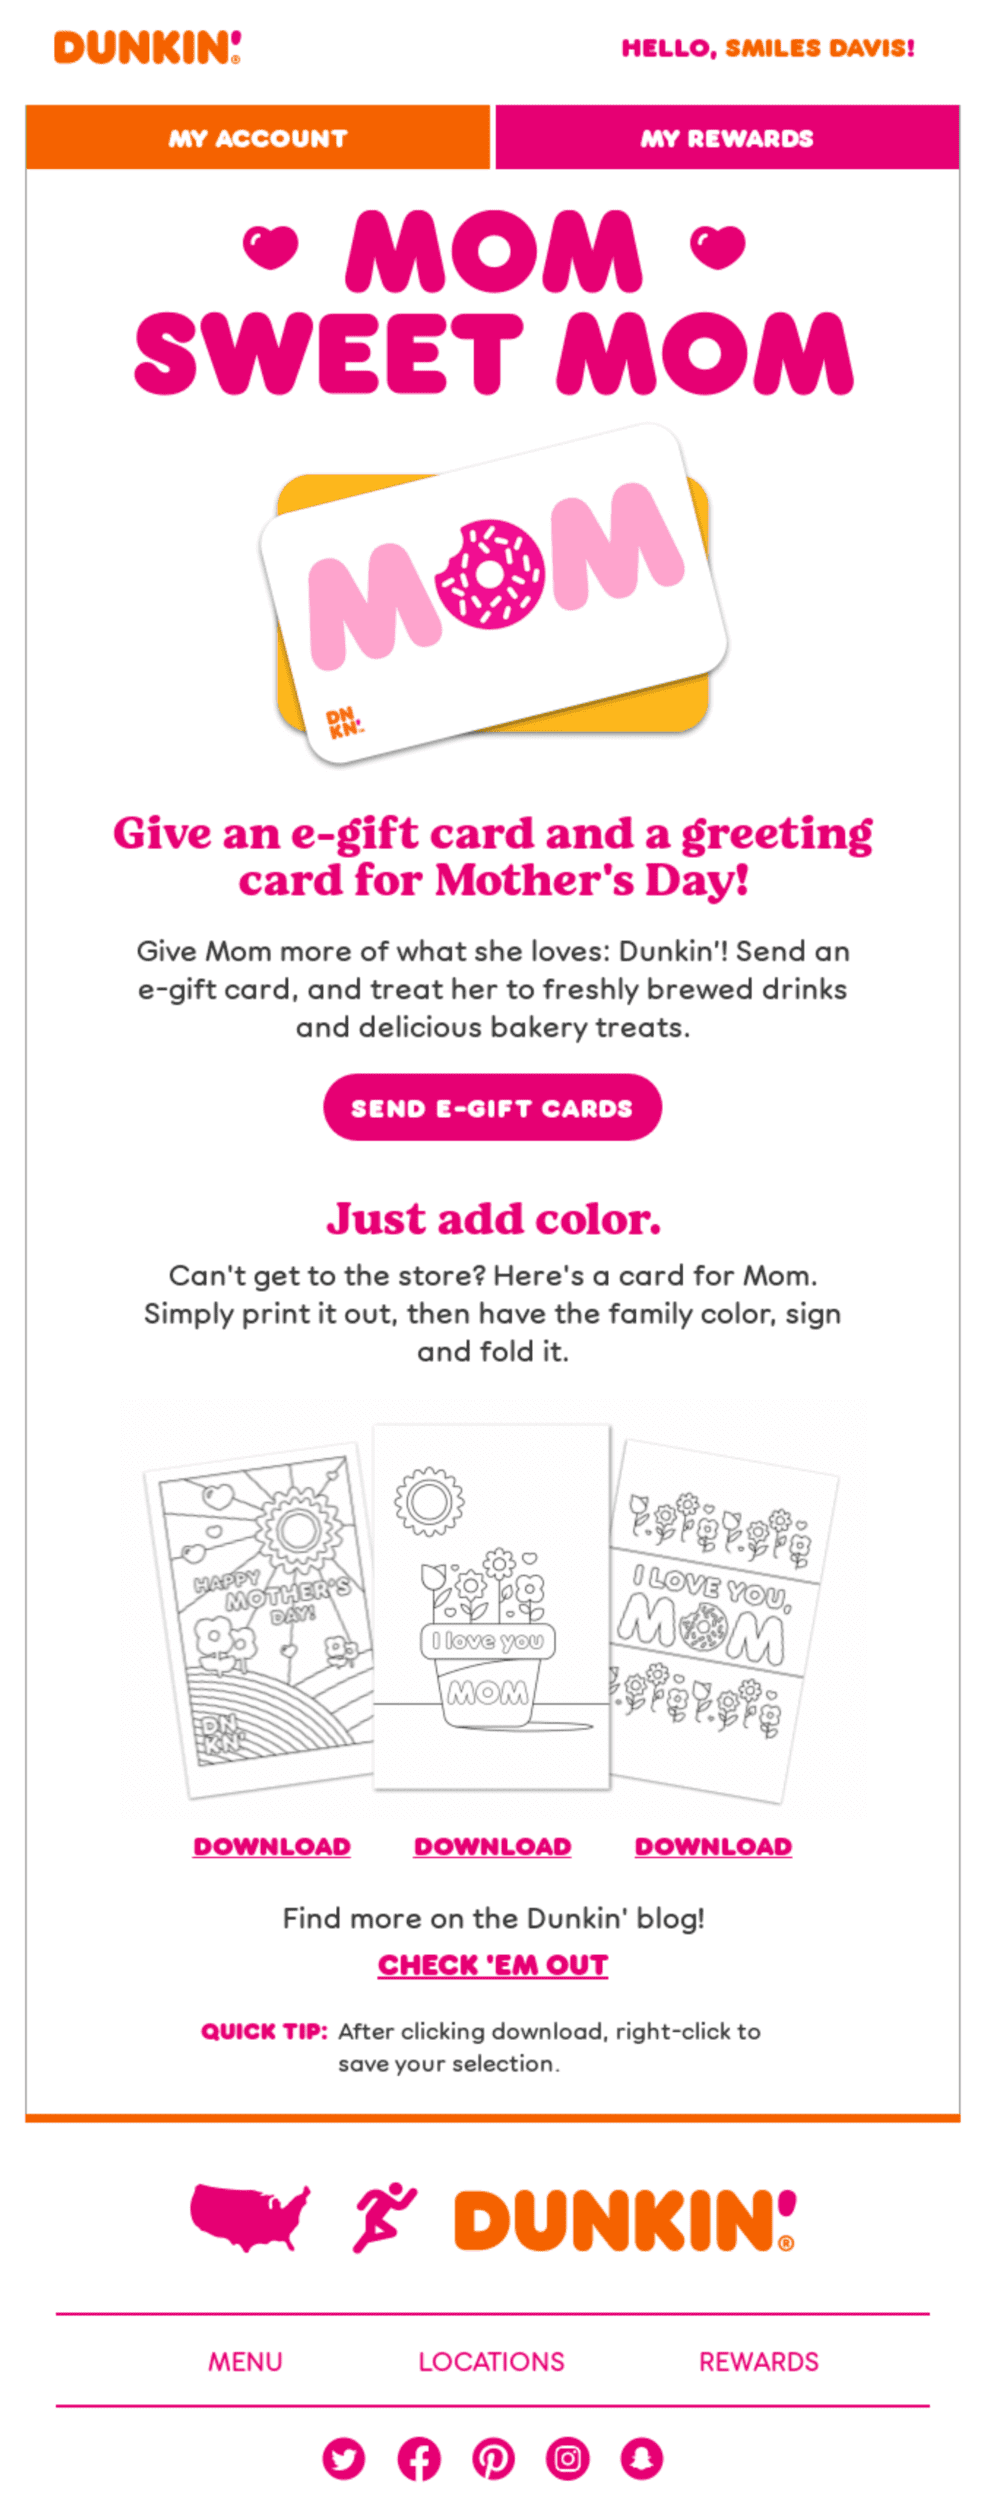 Mother’s Day email subject line example from Dunkin Donuts